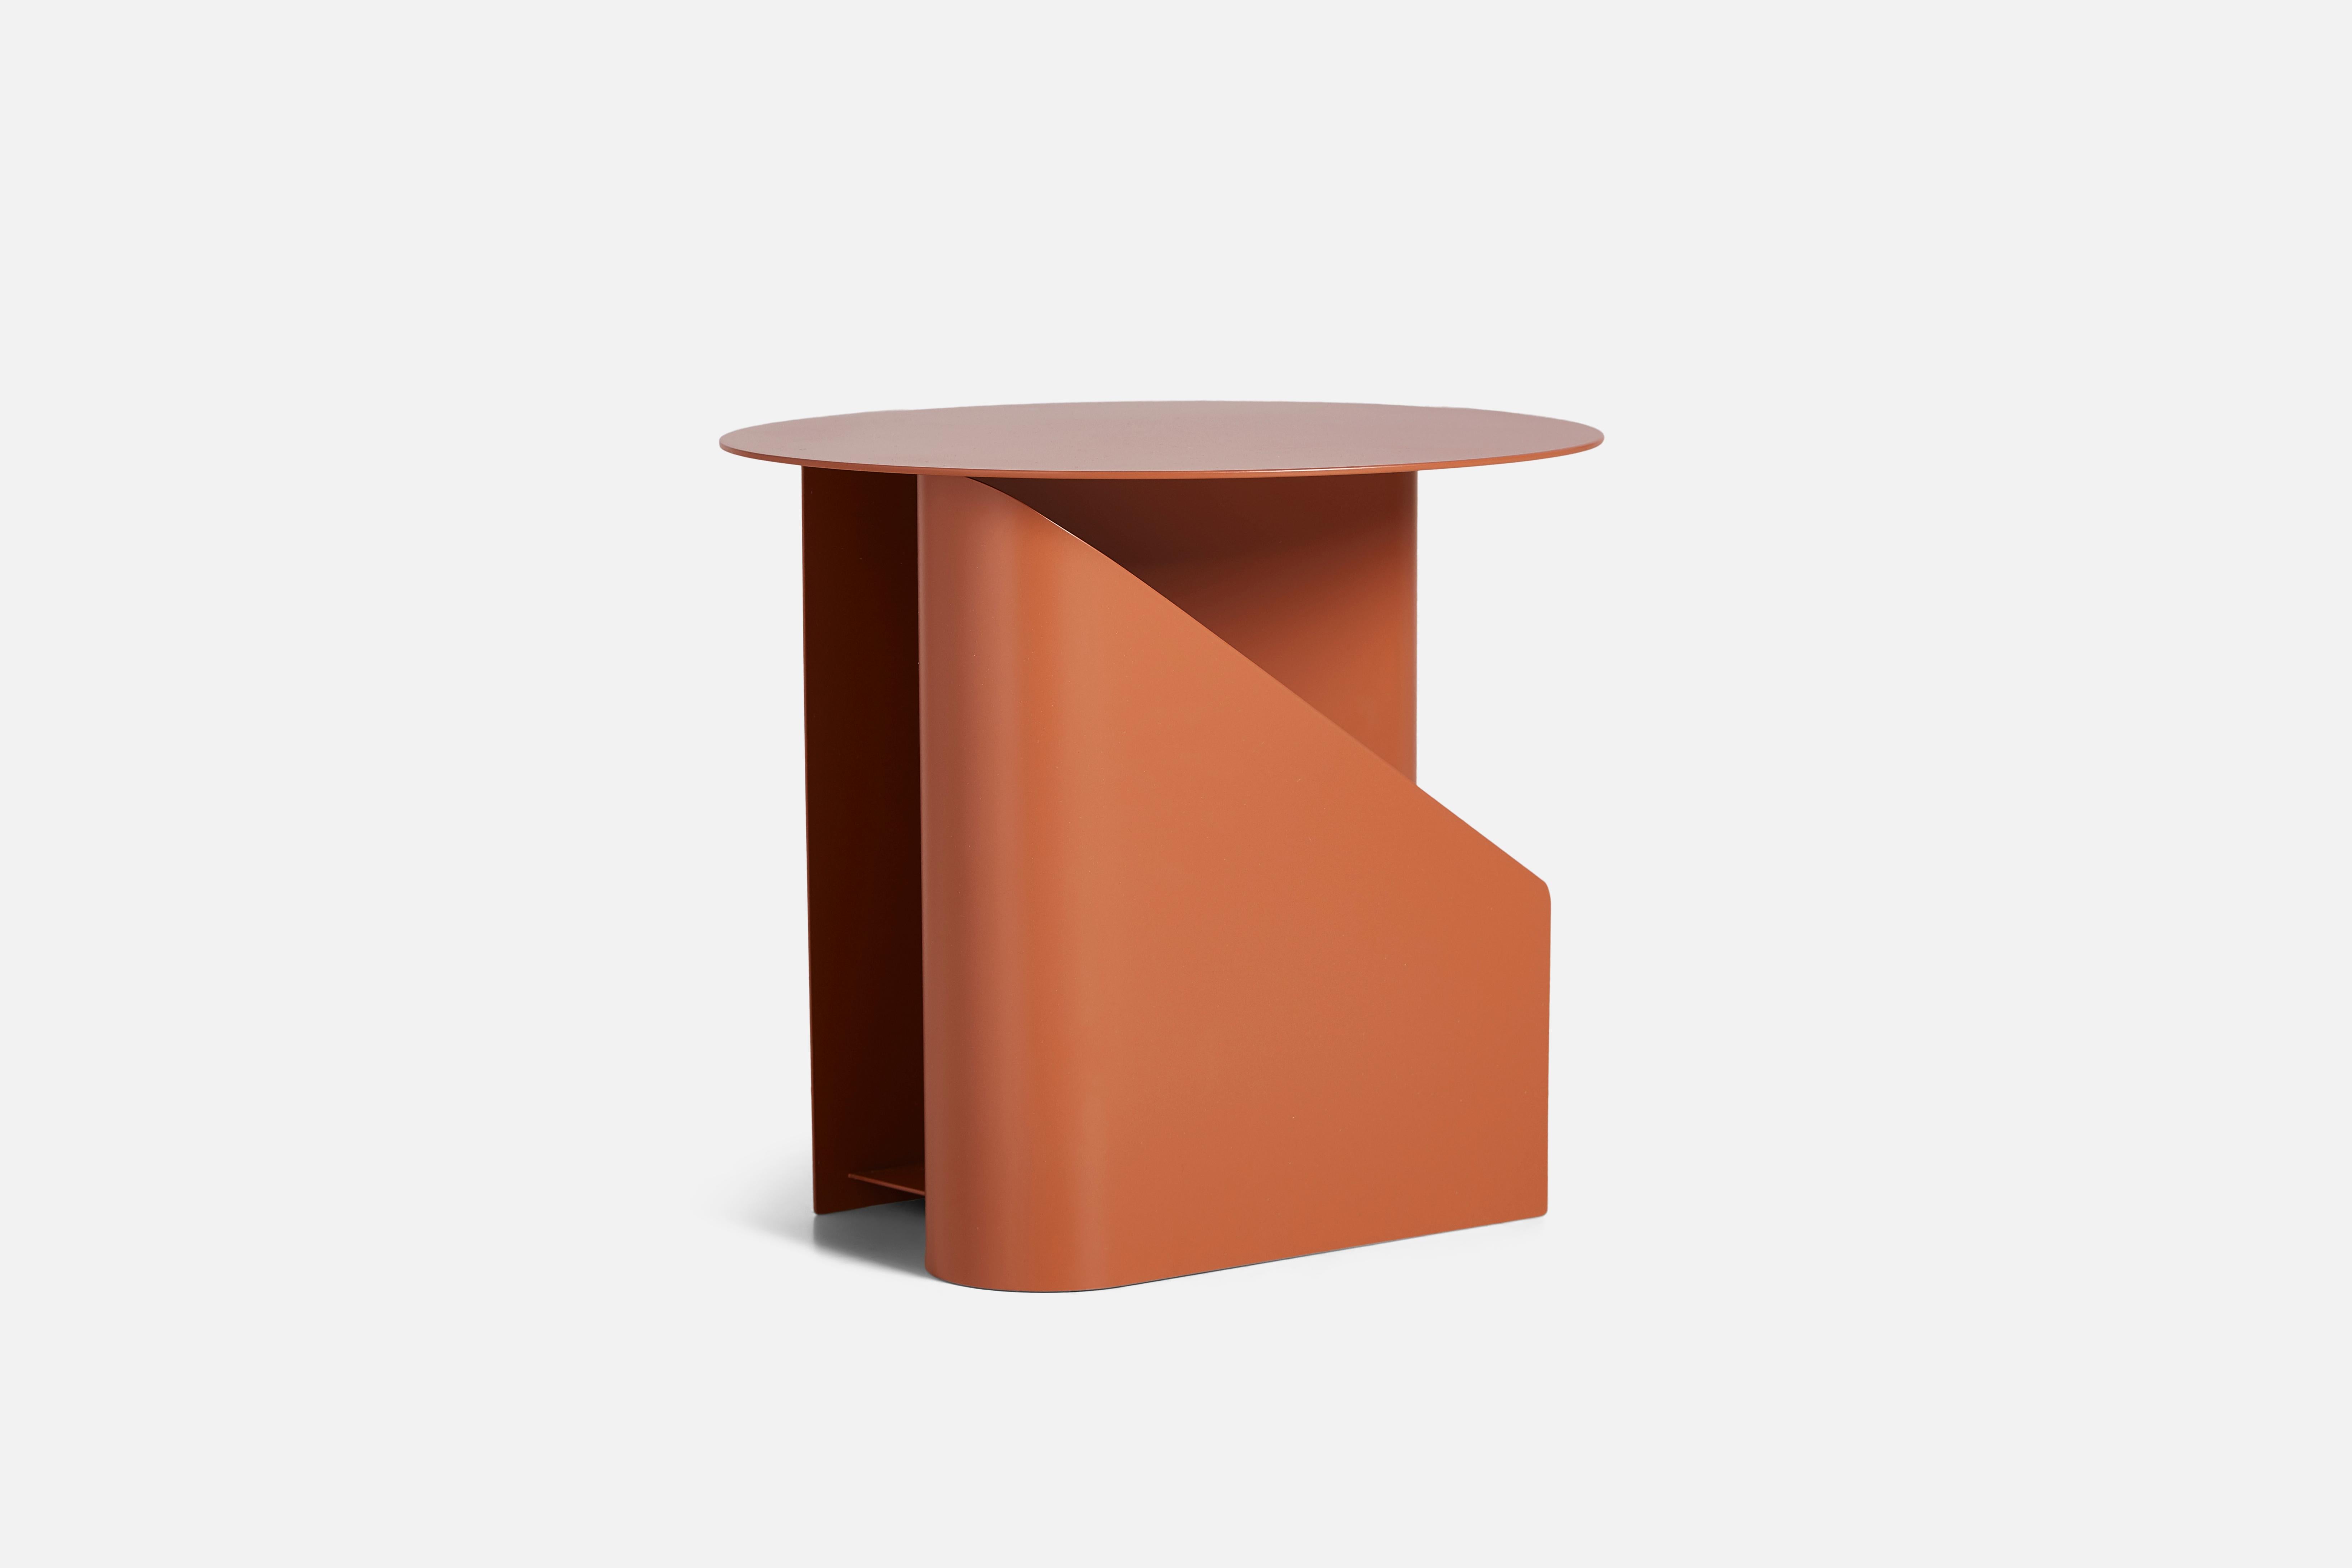 Burnt orange Sentrum side table by Schmahl +Schnippering
Materials: Metal
Dimensions: D 40 x W 40 x H 36 cm
Also available in different colours.

The founders, Mia and Torben Koed, decided to put their 30 years of experience into a new project.